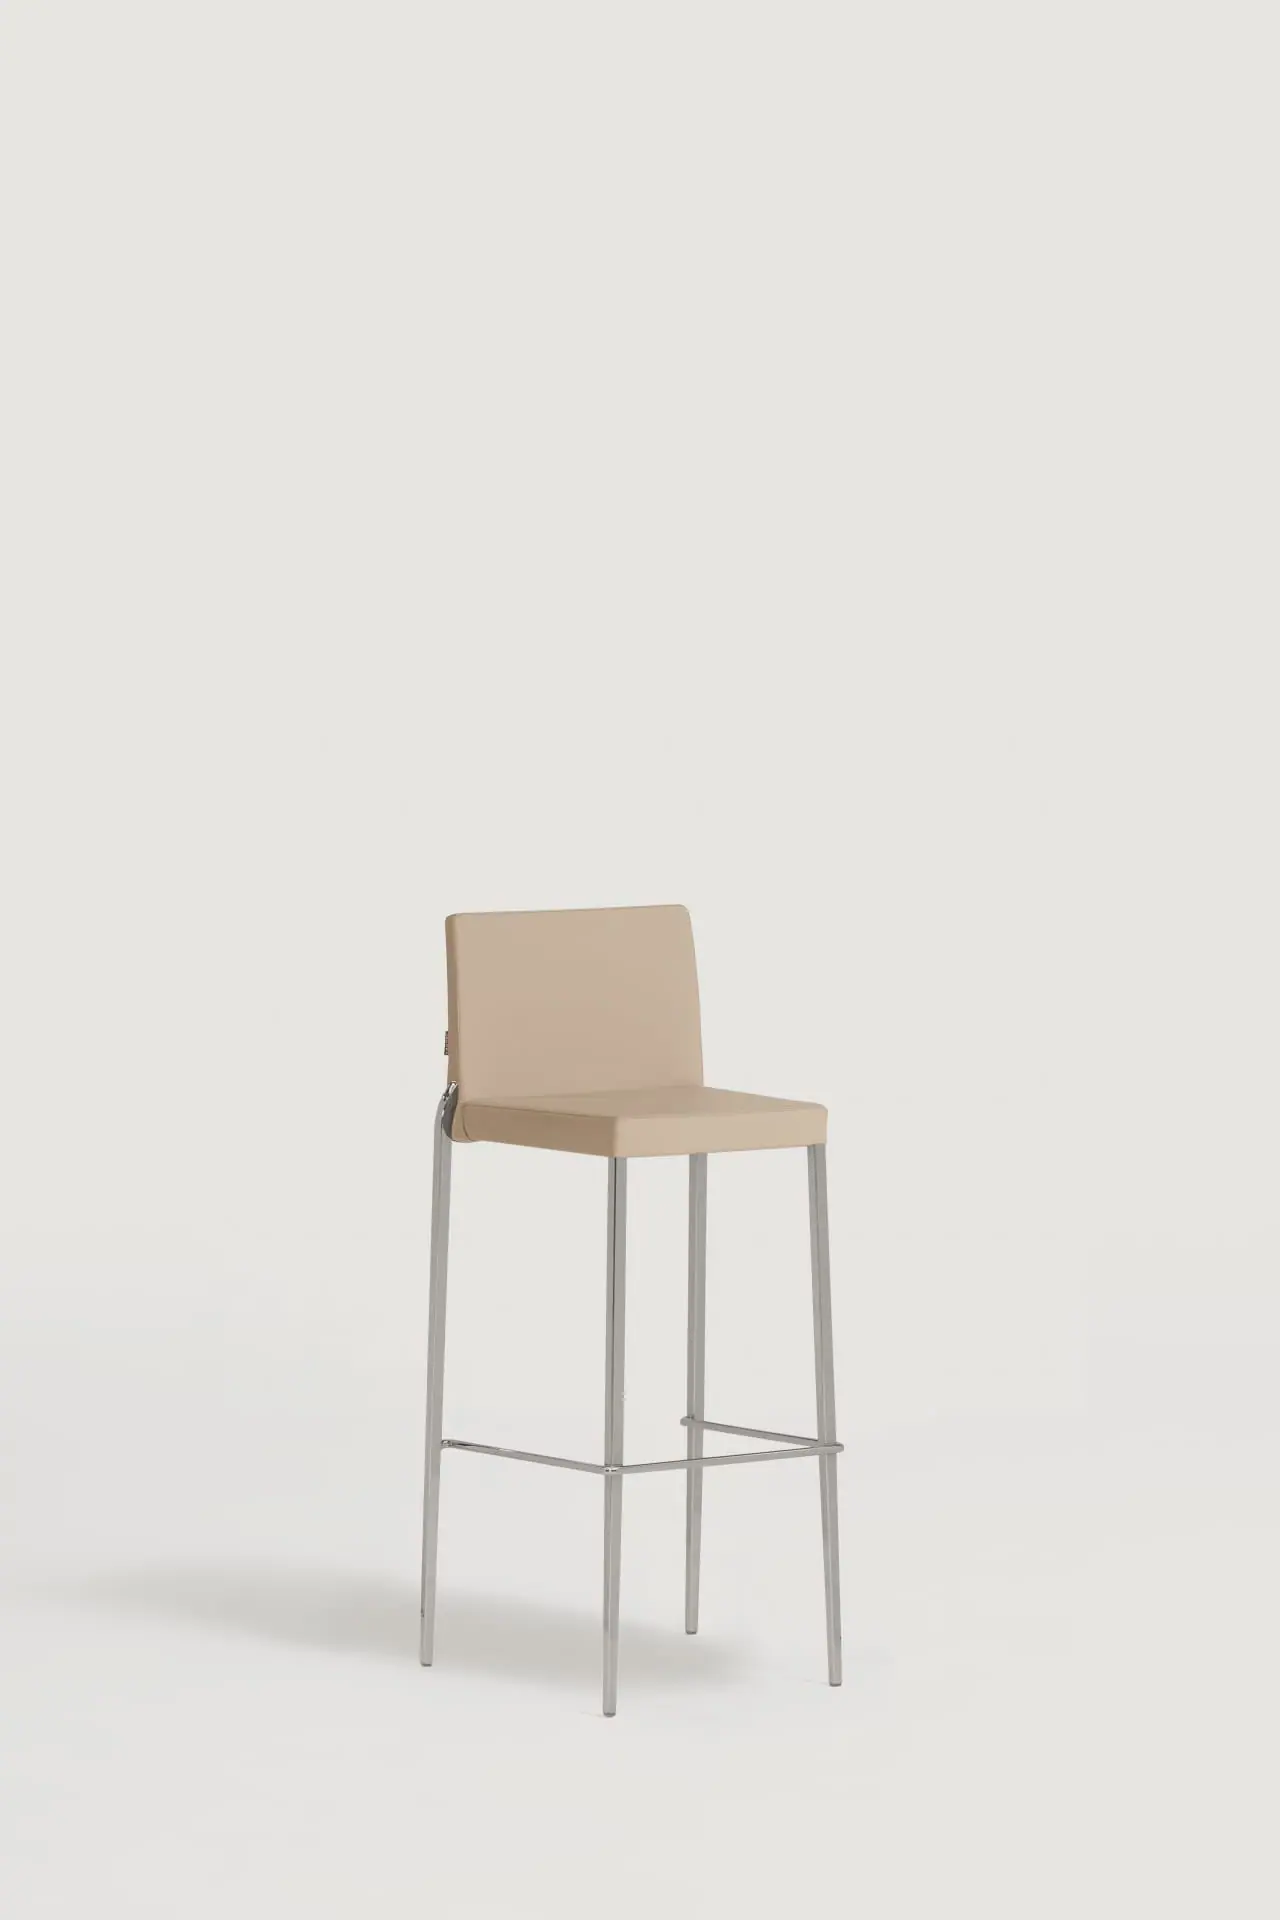 capdell-flick-chair-05